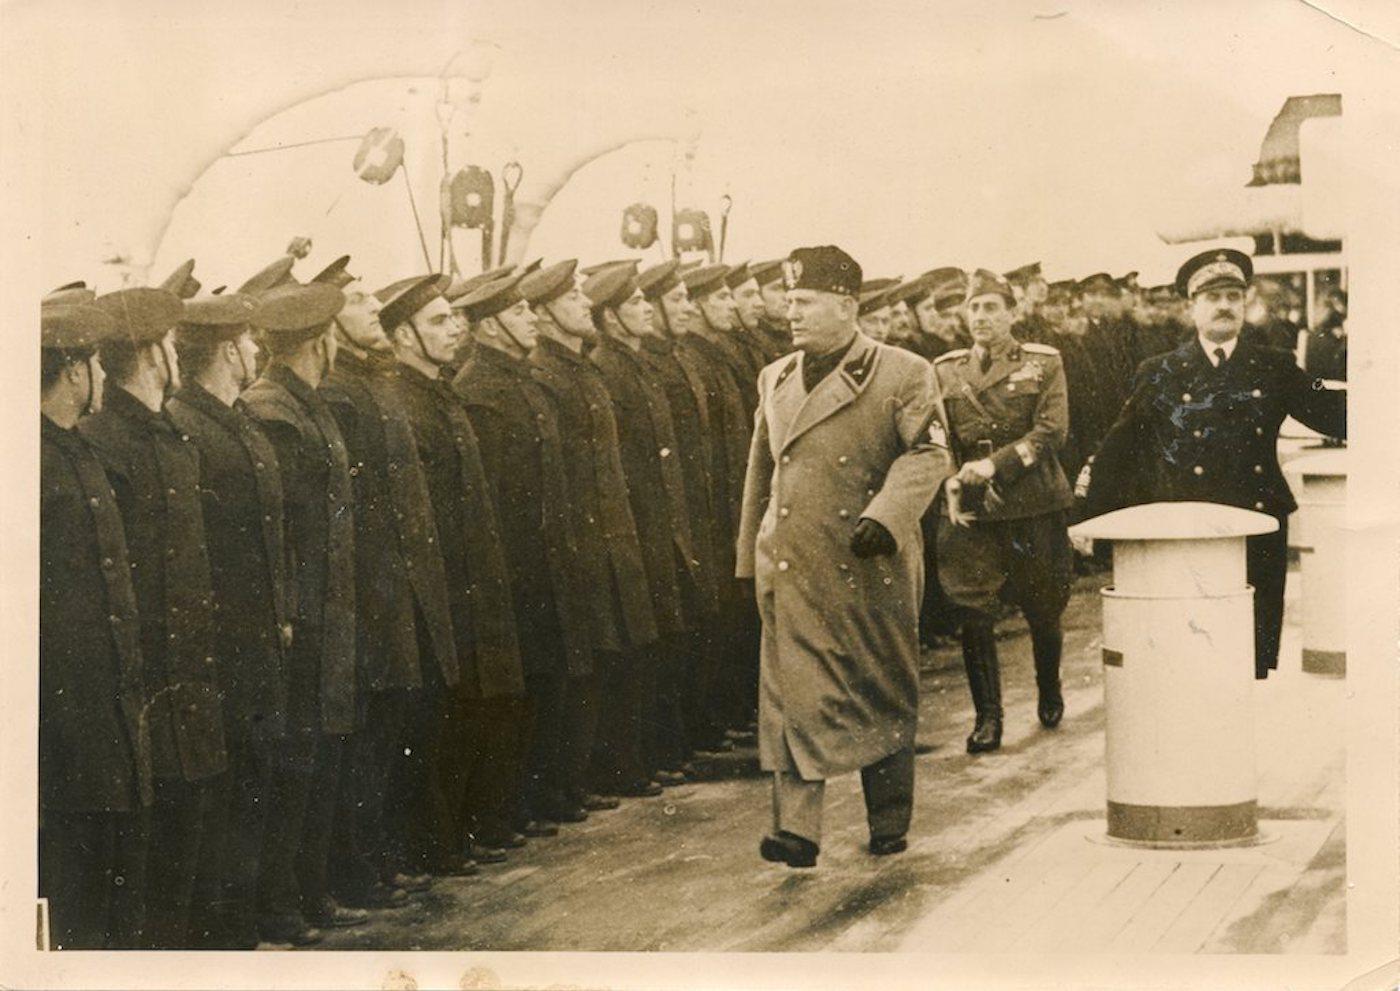 Unknown Black and White Photograph - Mussolini Visits the Sailors - Vintage Photograph 1937